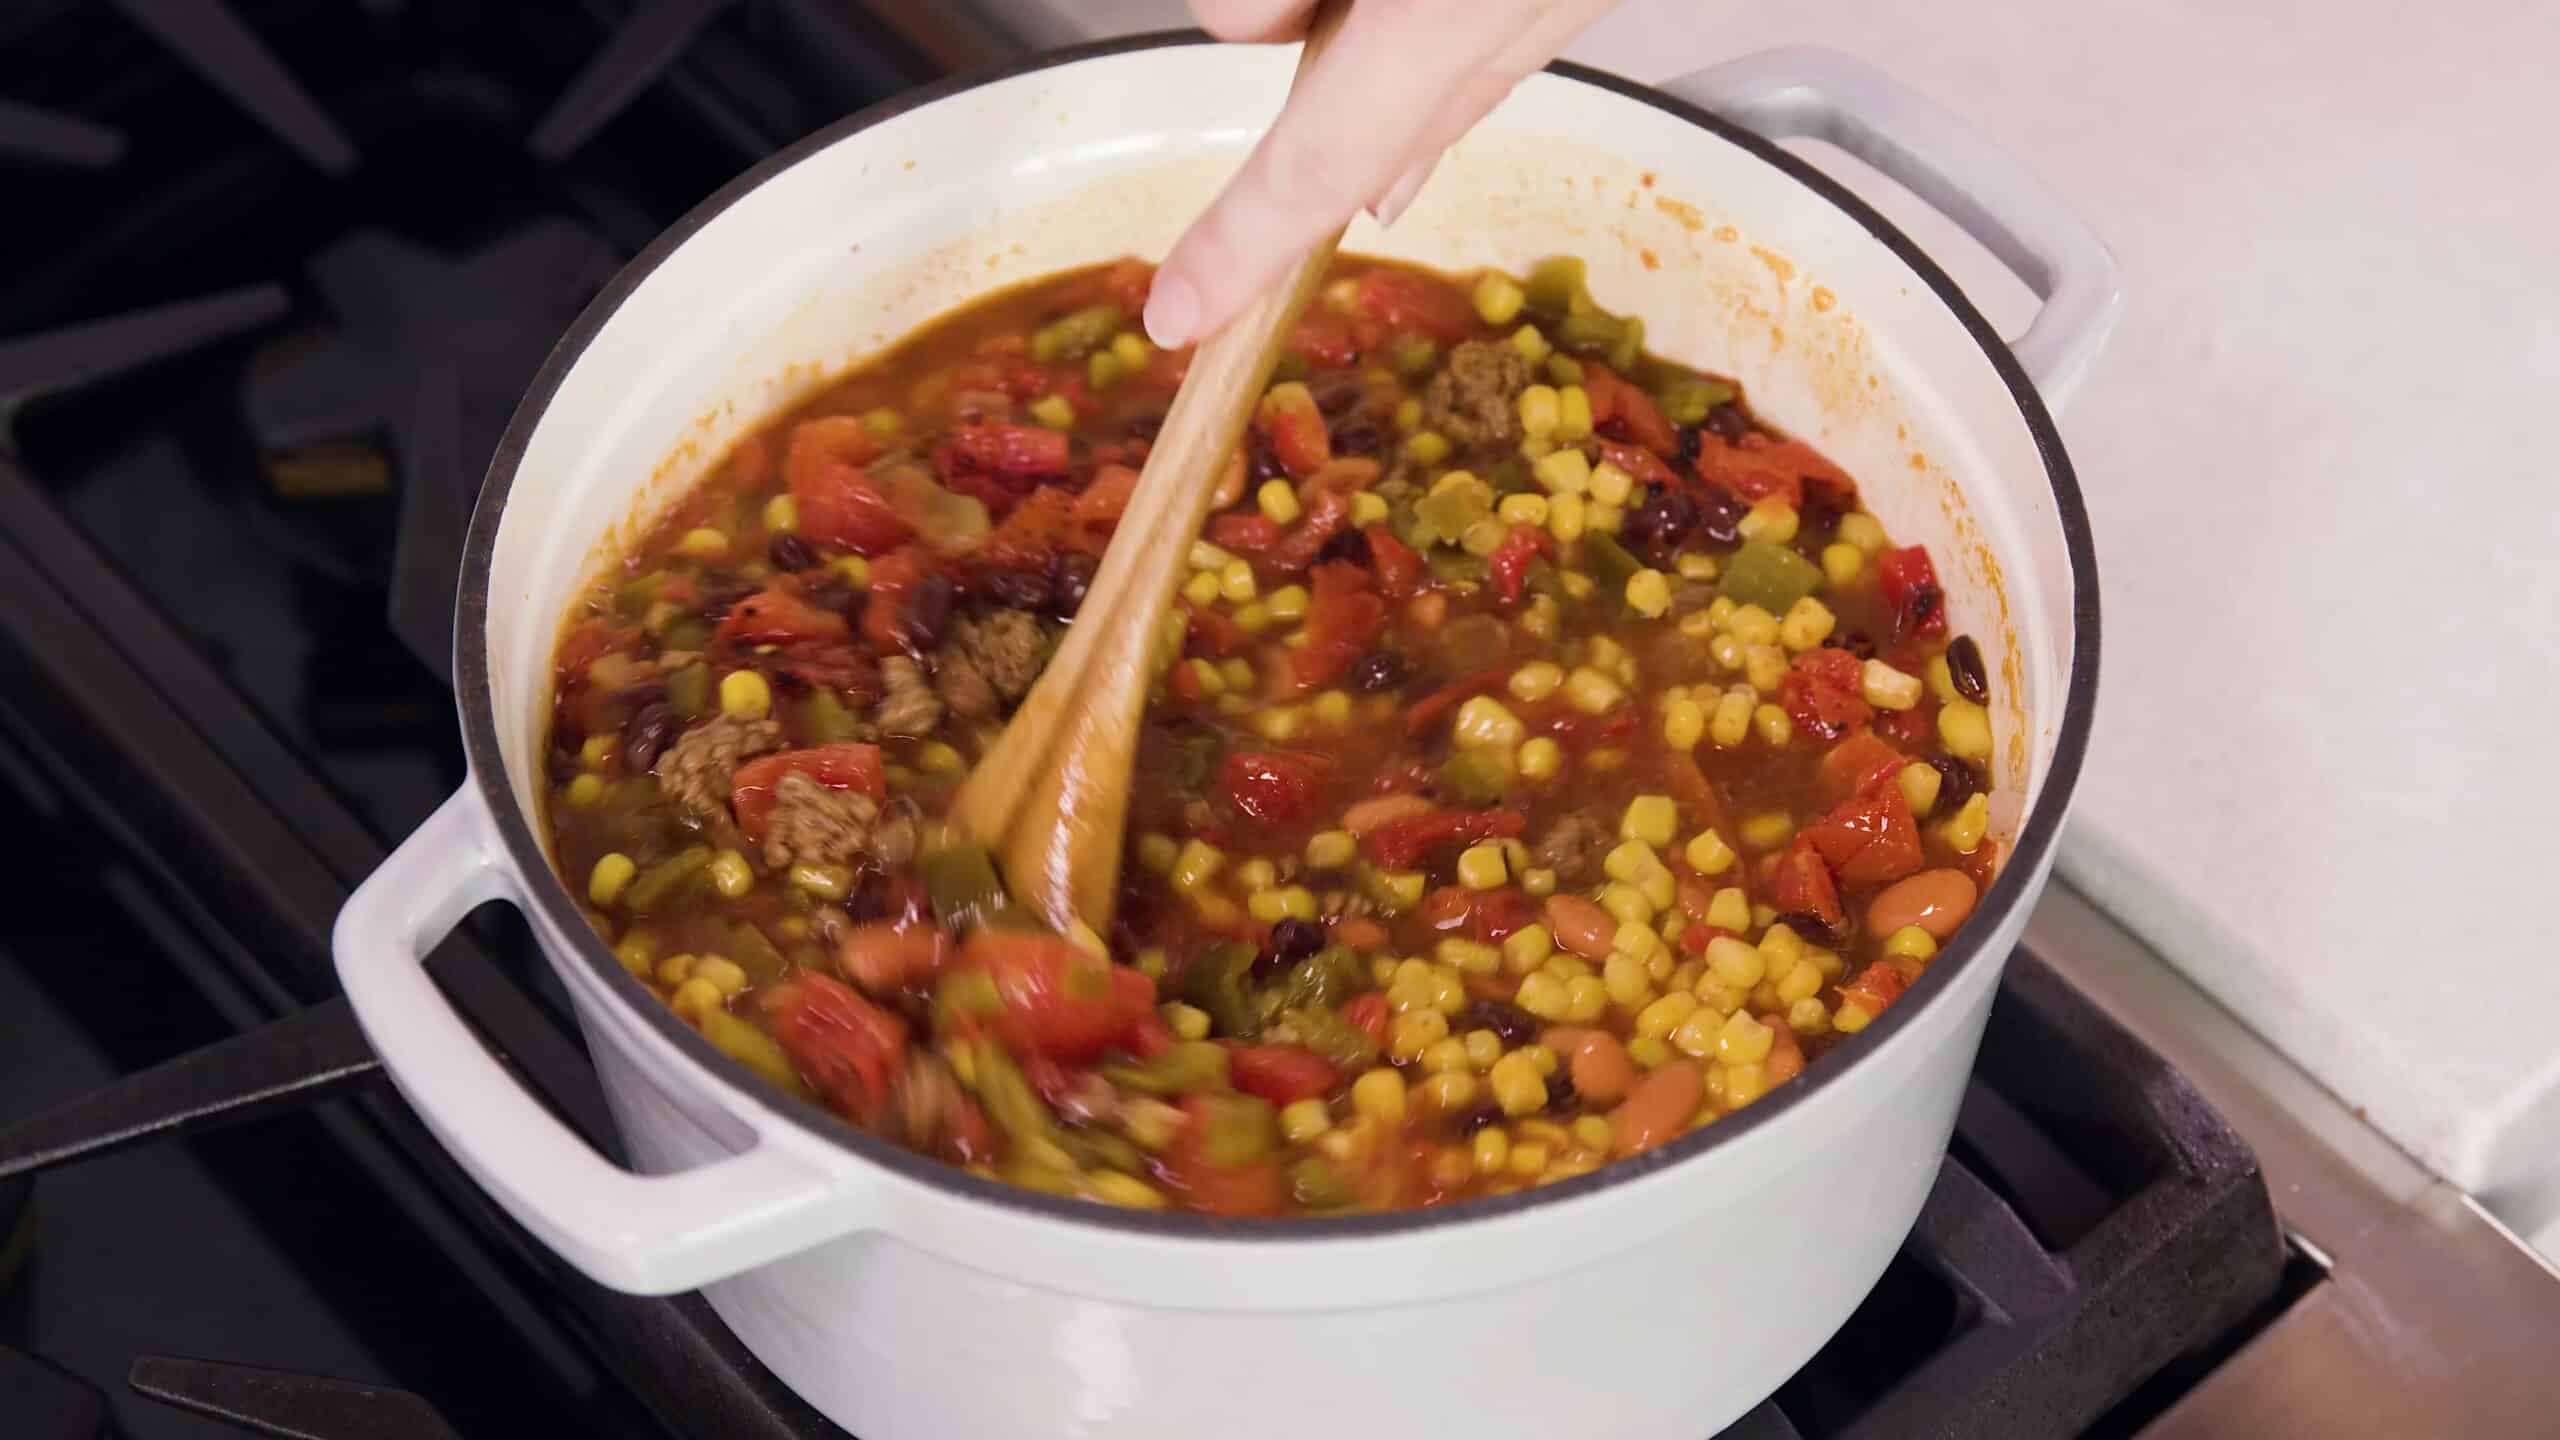 Angled view of a white enamel coated cast iron pot filled with taco soup ingredients and simmering on a stovetop burner being stirred with a wooden spoon.